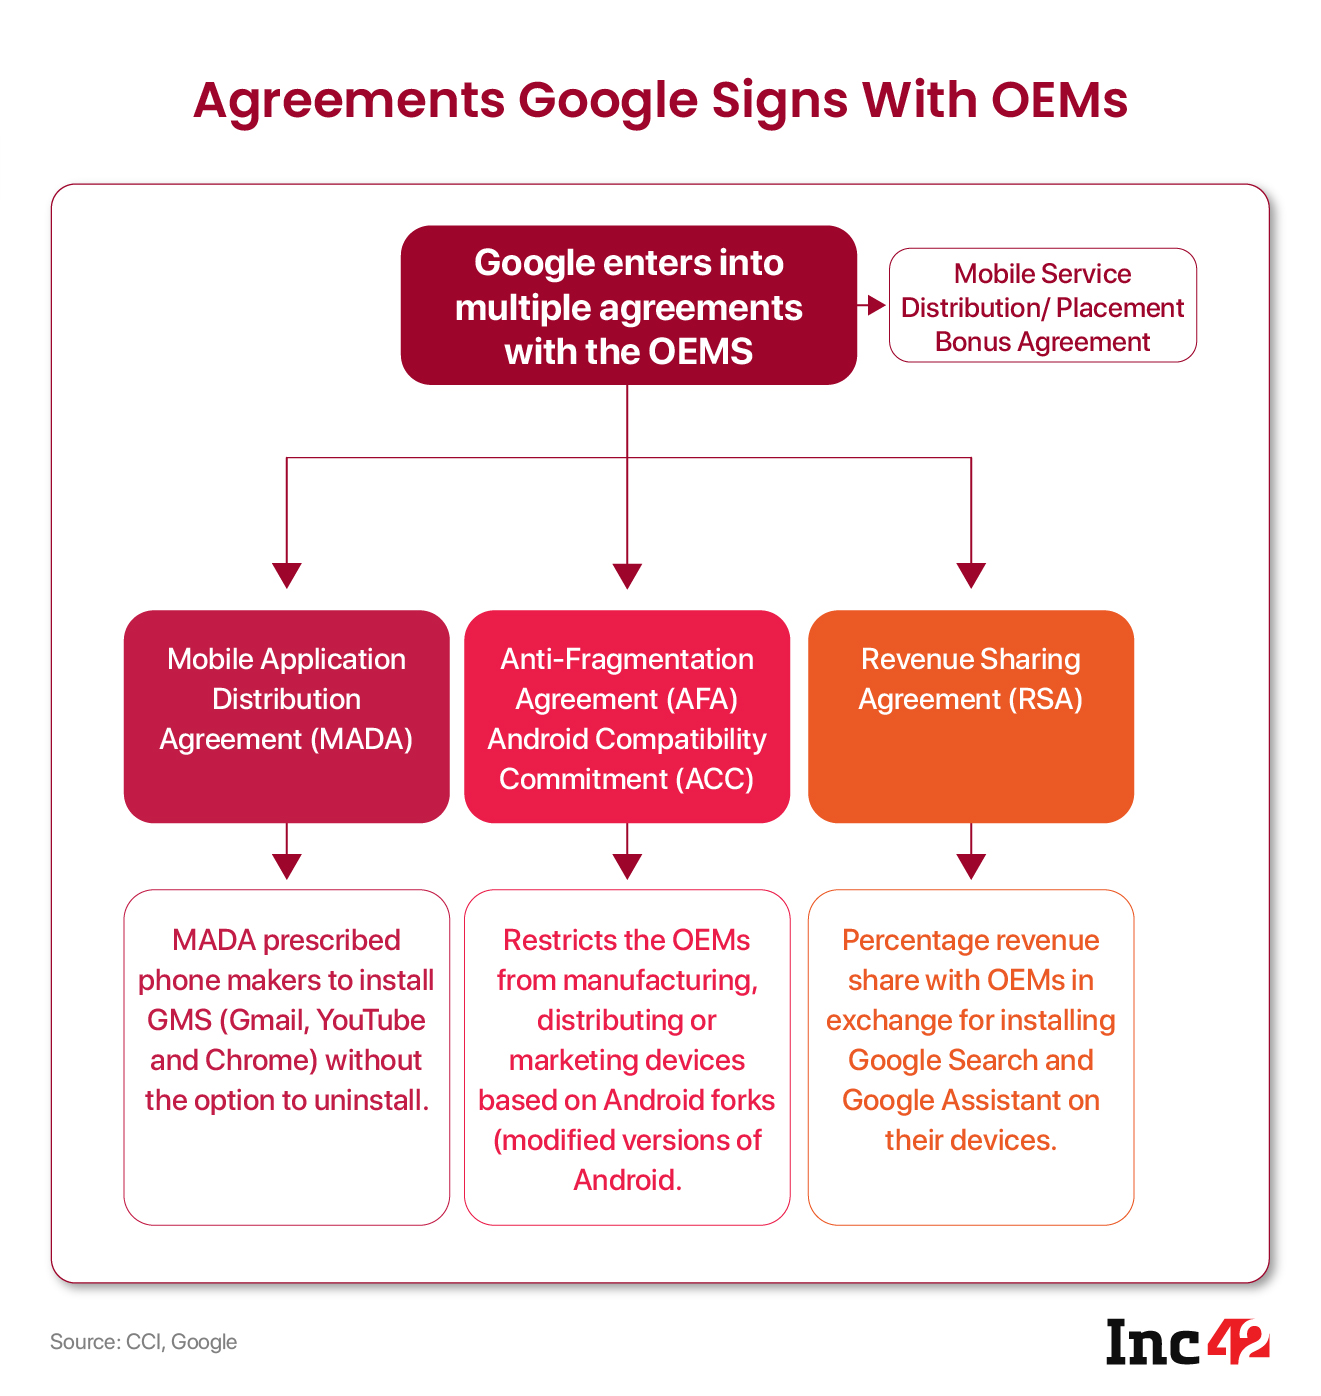 Google enters into multiple agreements with the OEMS